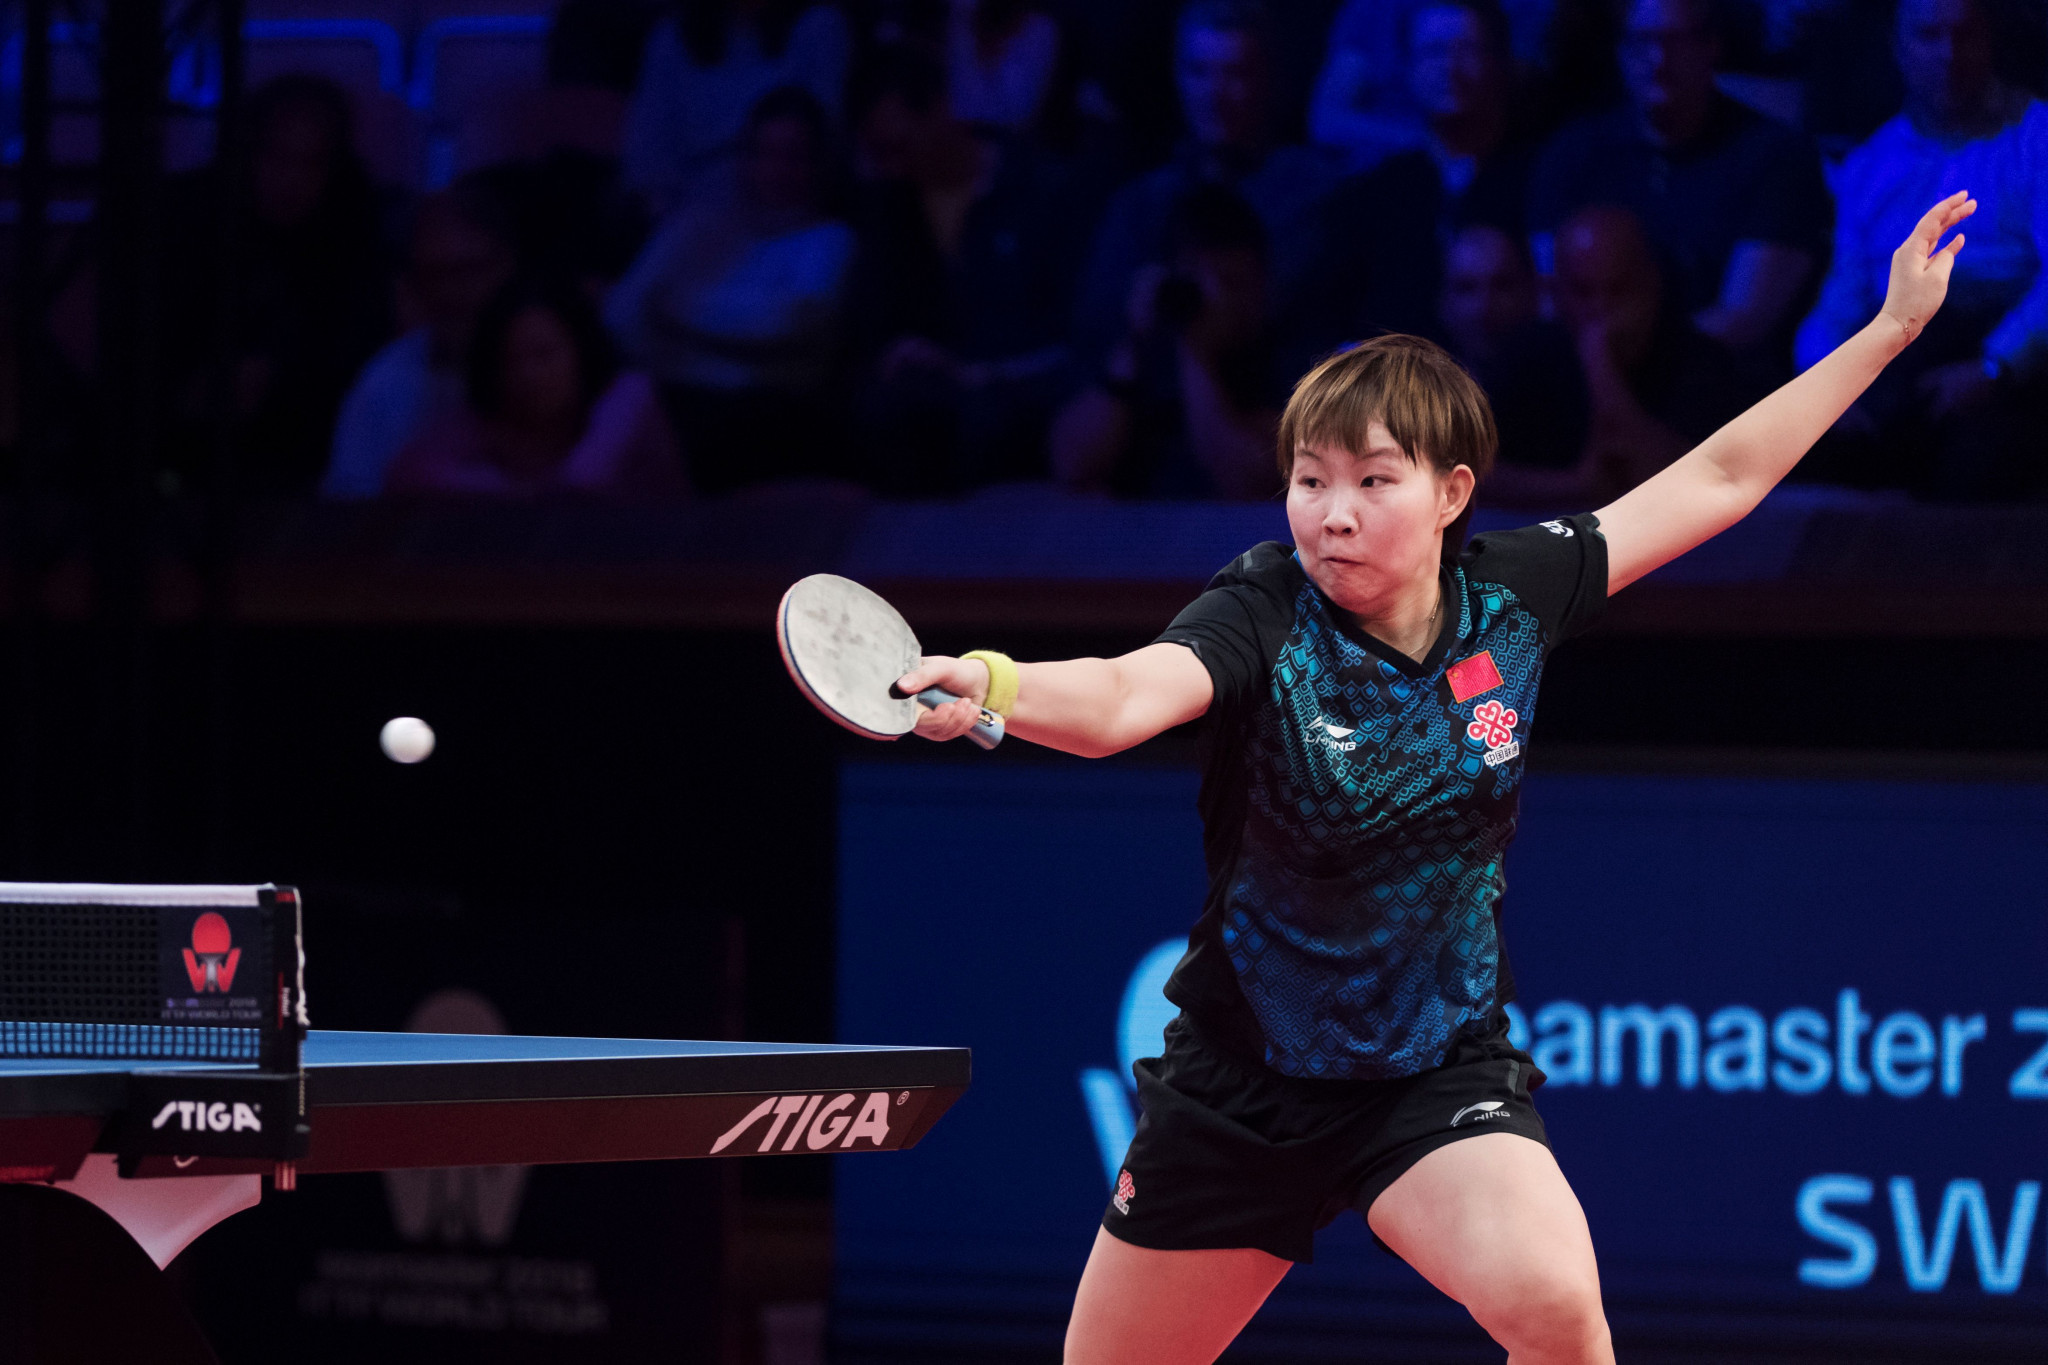 World number one Zhu Yuling went through in the women's draw ©Getty Images